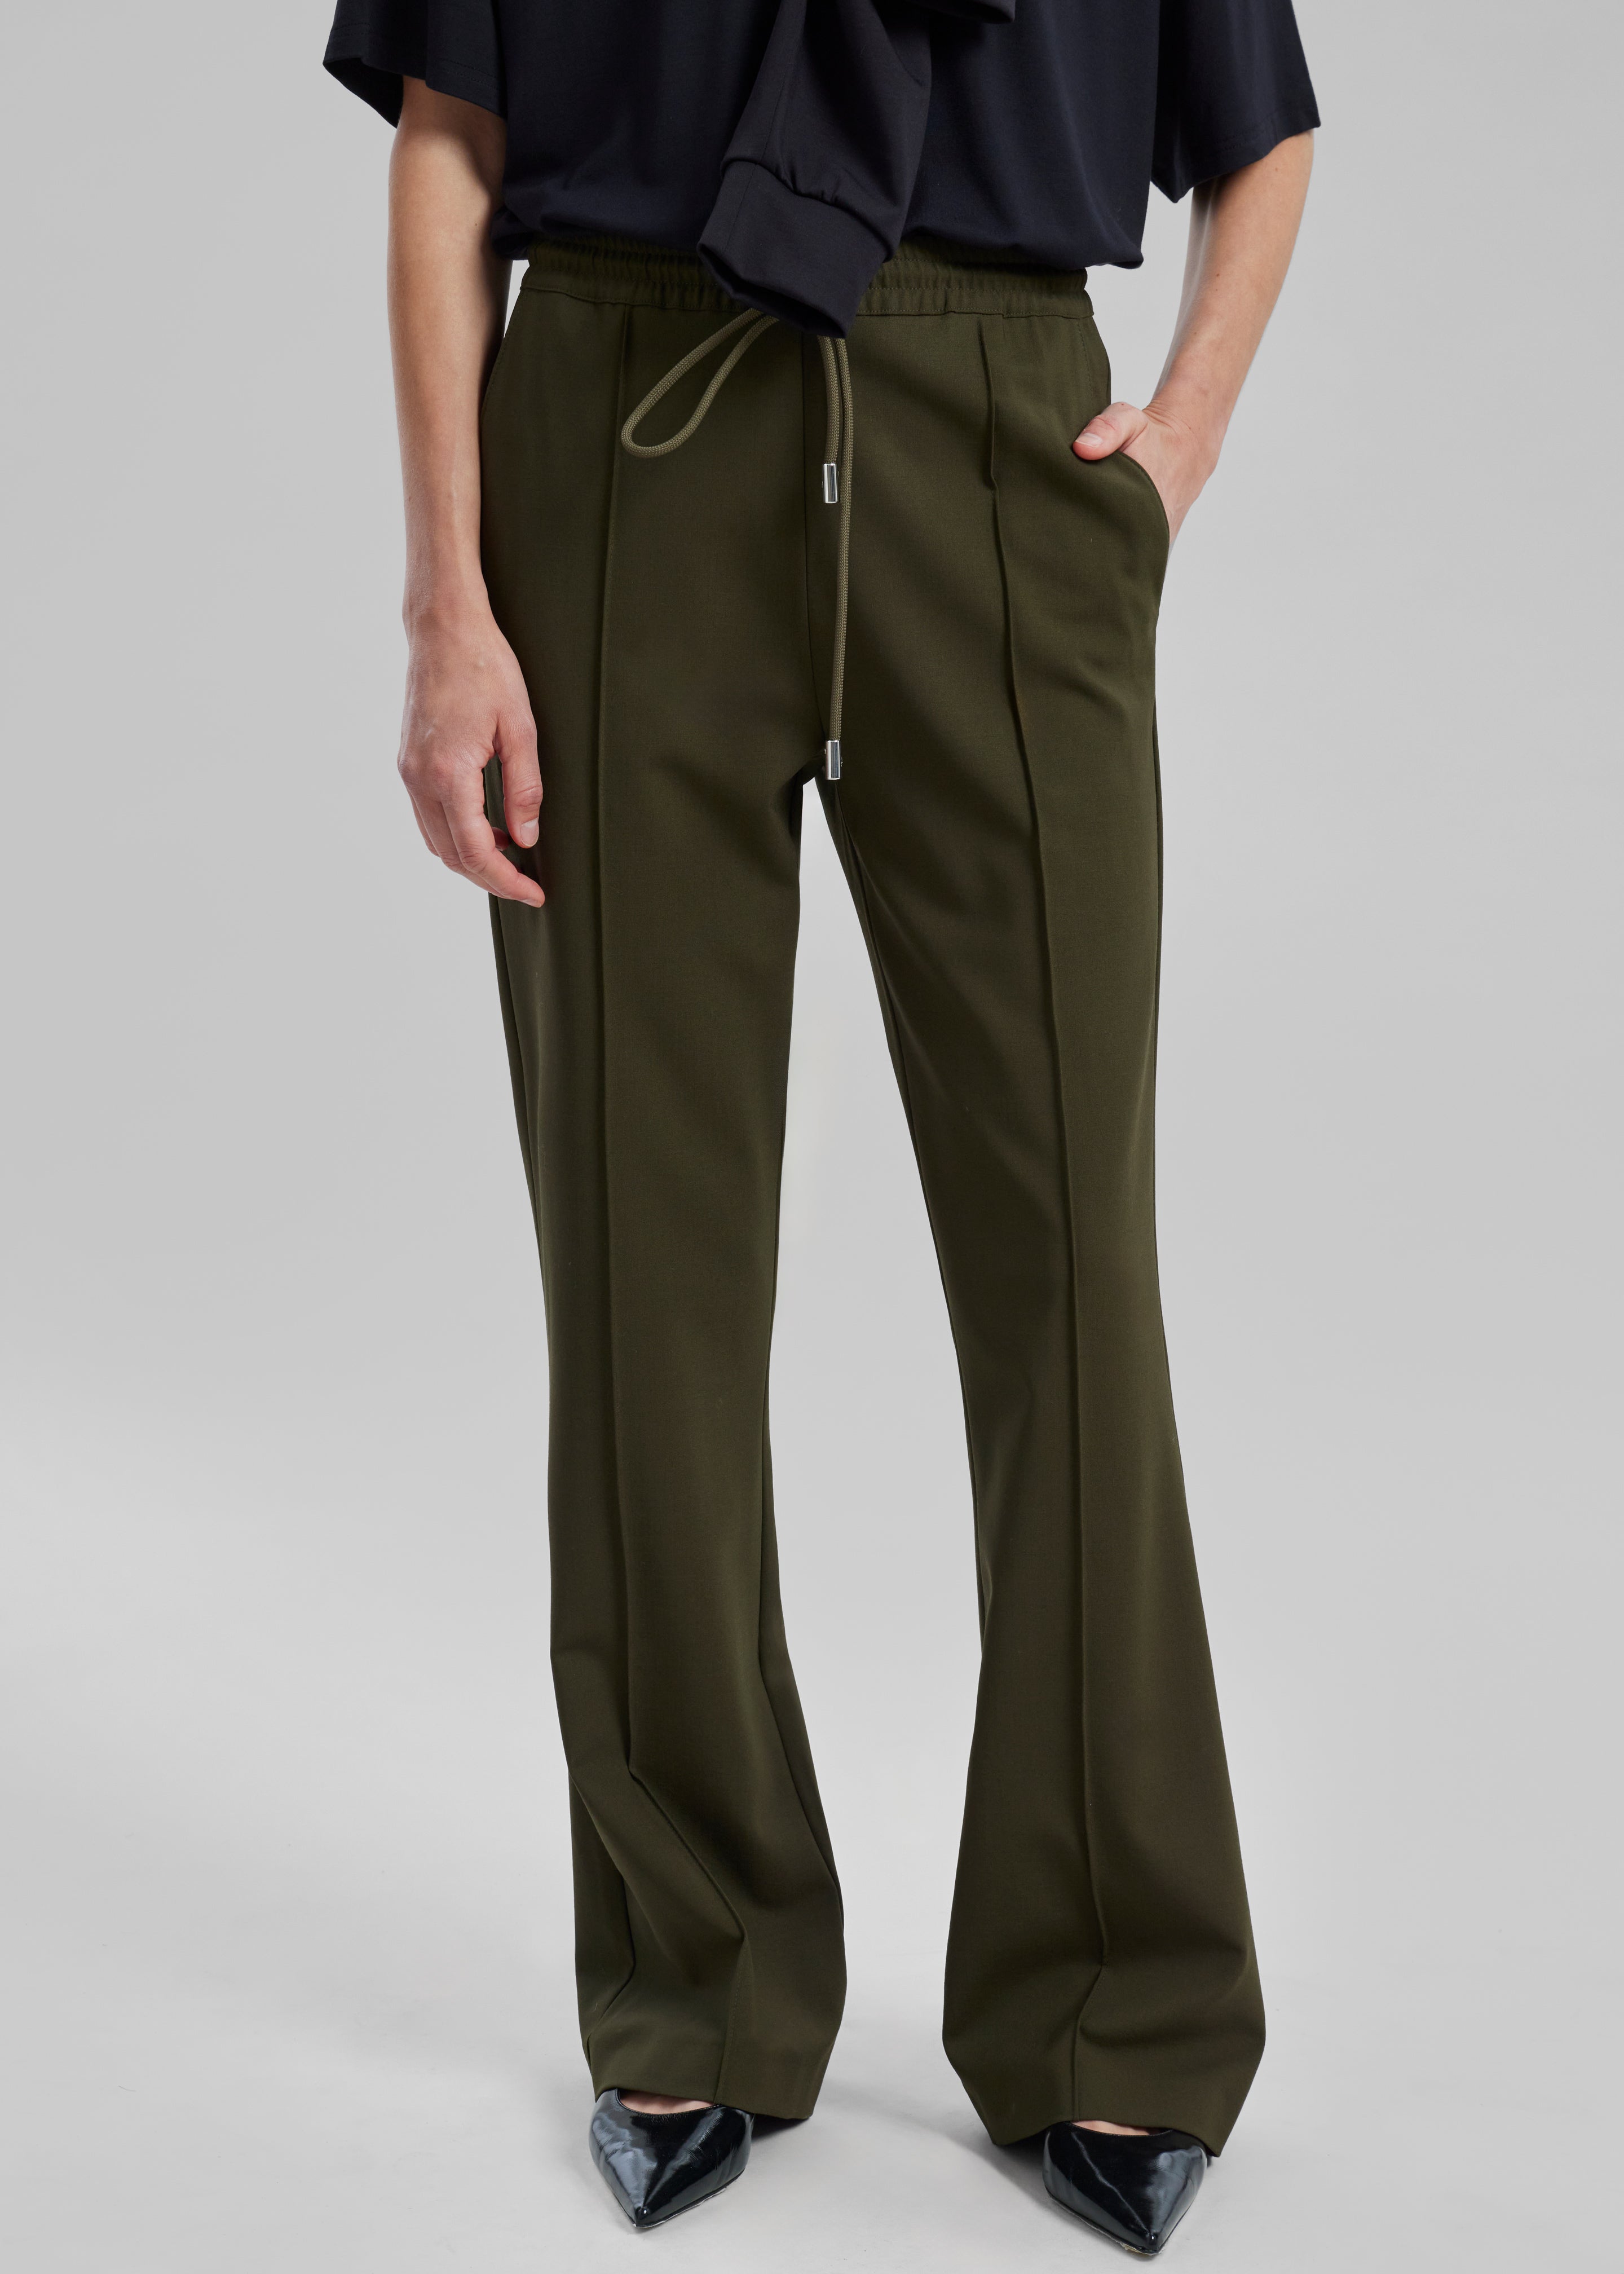 JW Anderson Drawstring Waist Tailored Trousers - Olive - 2